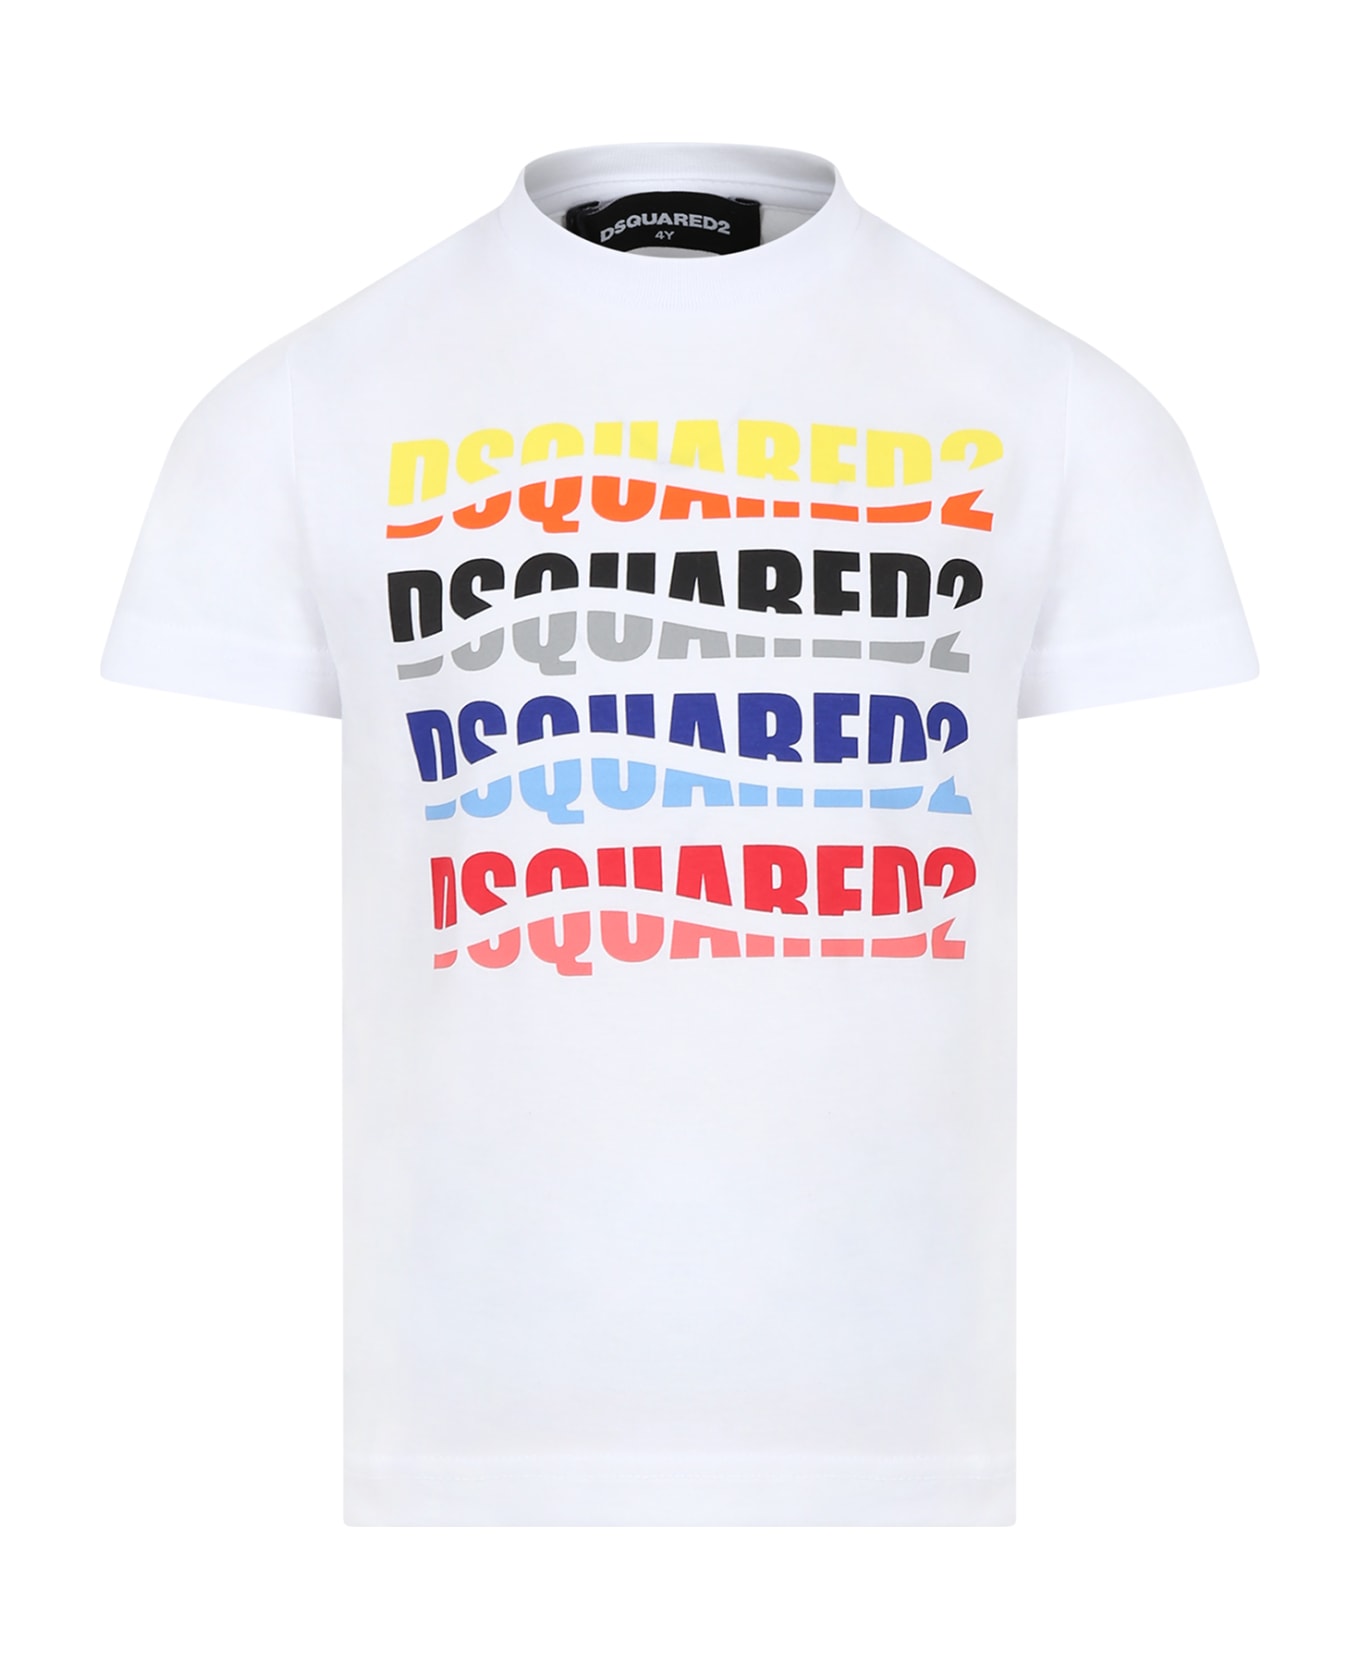 Dsquared2 White T-shirt For Boy With Logo - White